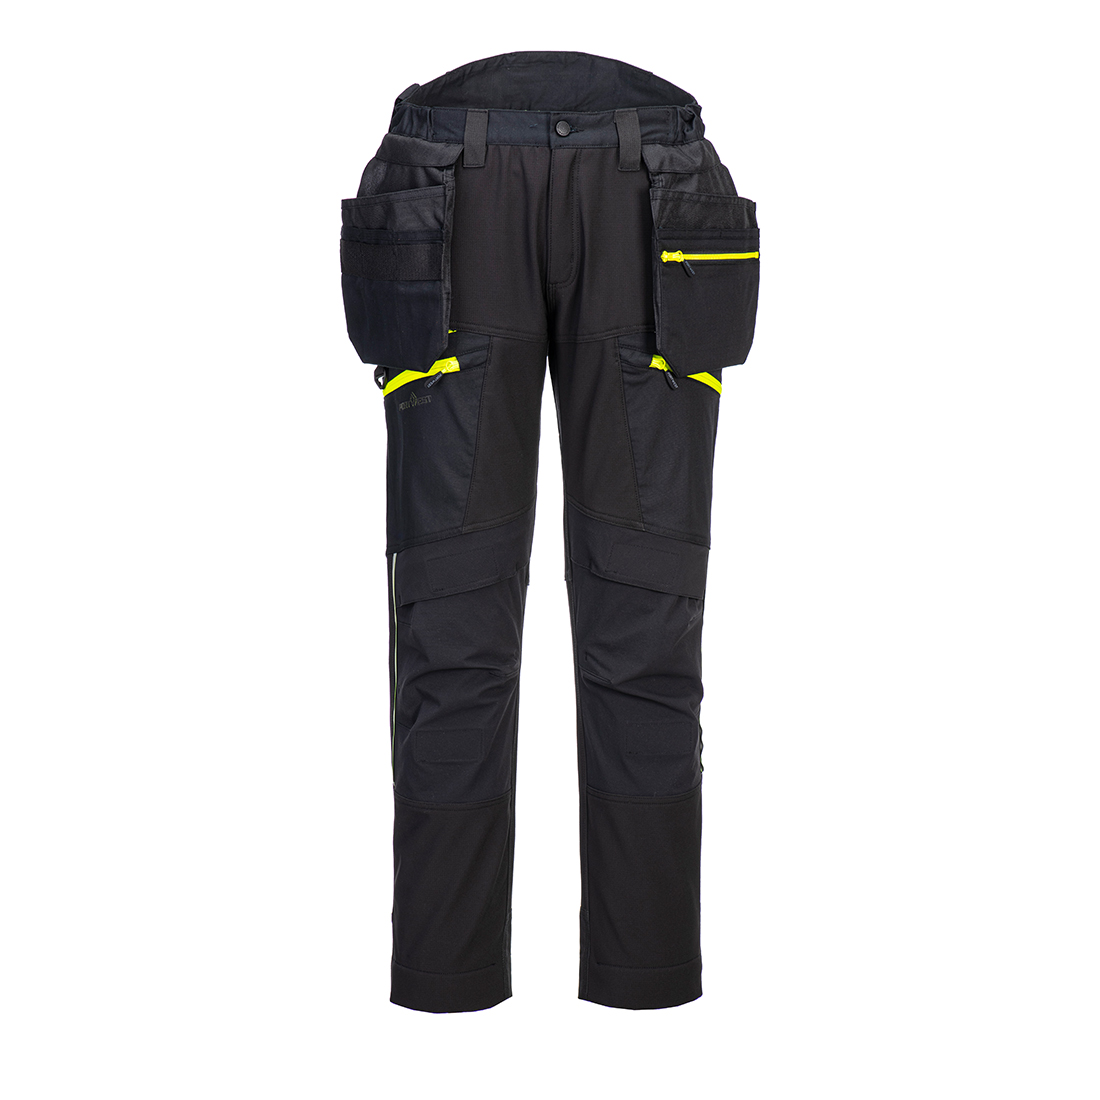 DX4 Softshell Detachable Holster Pocket Trousers